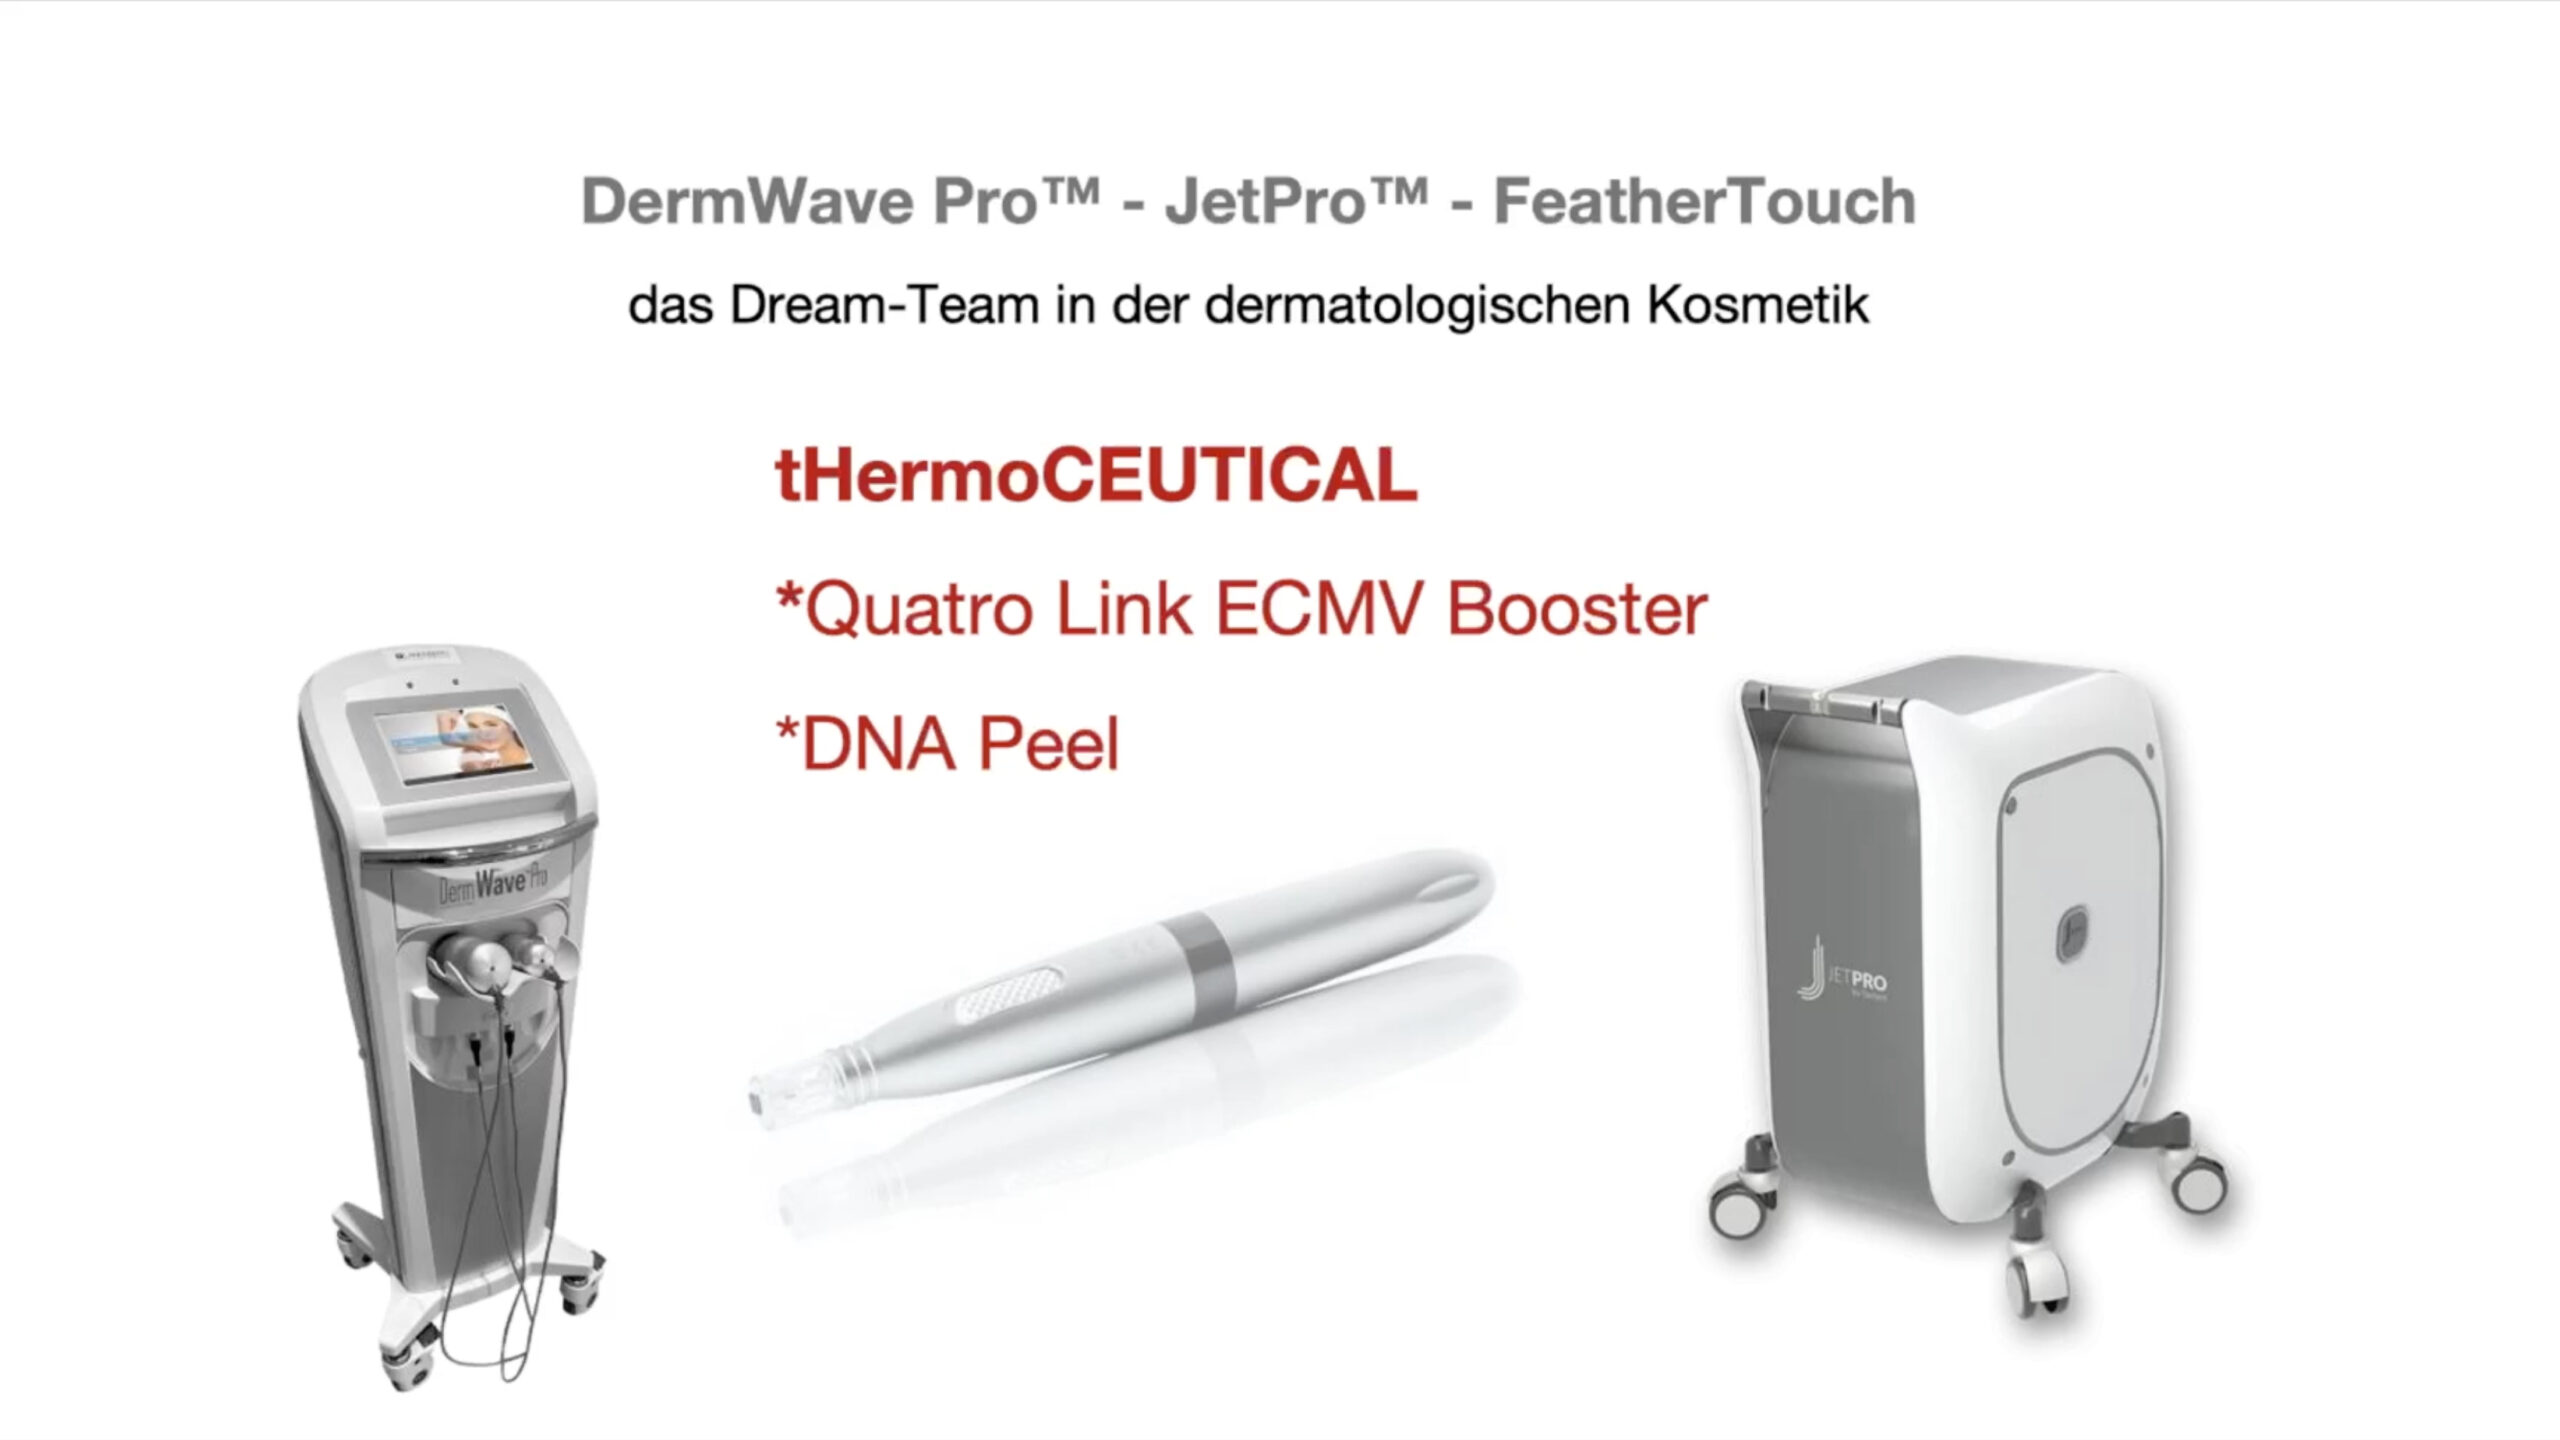 tHermoCEUTICAL – Quadro Link – Booster – DNA Peel